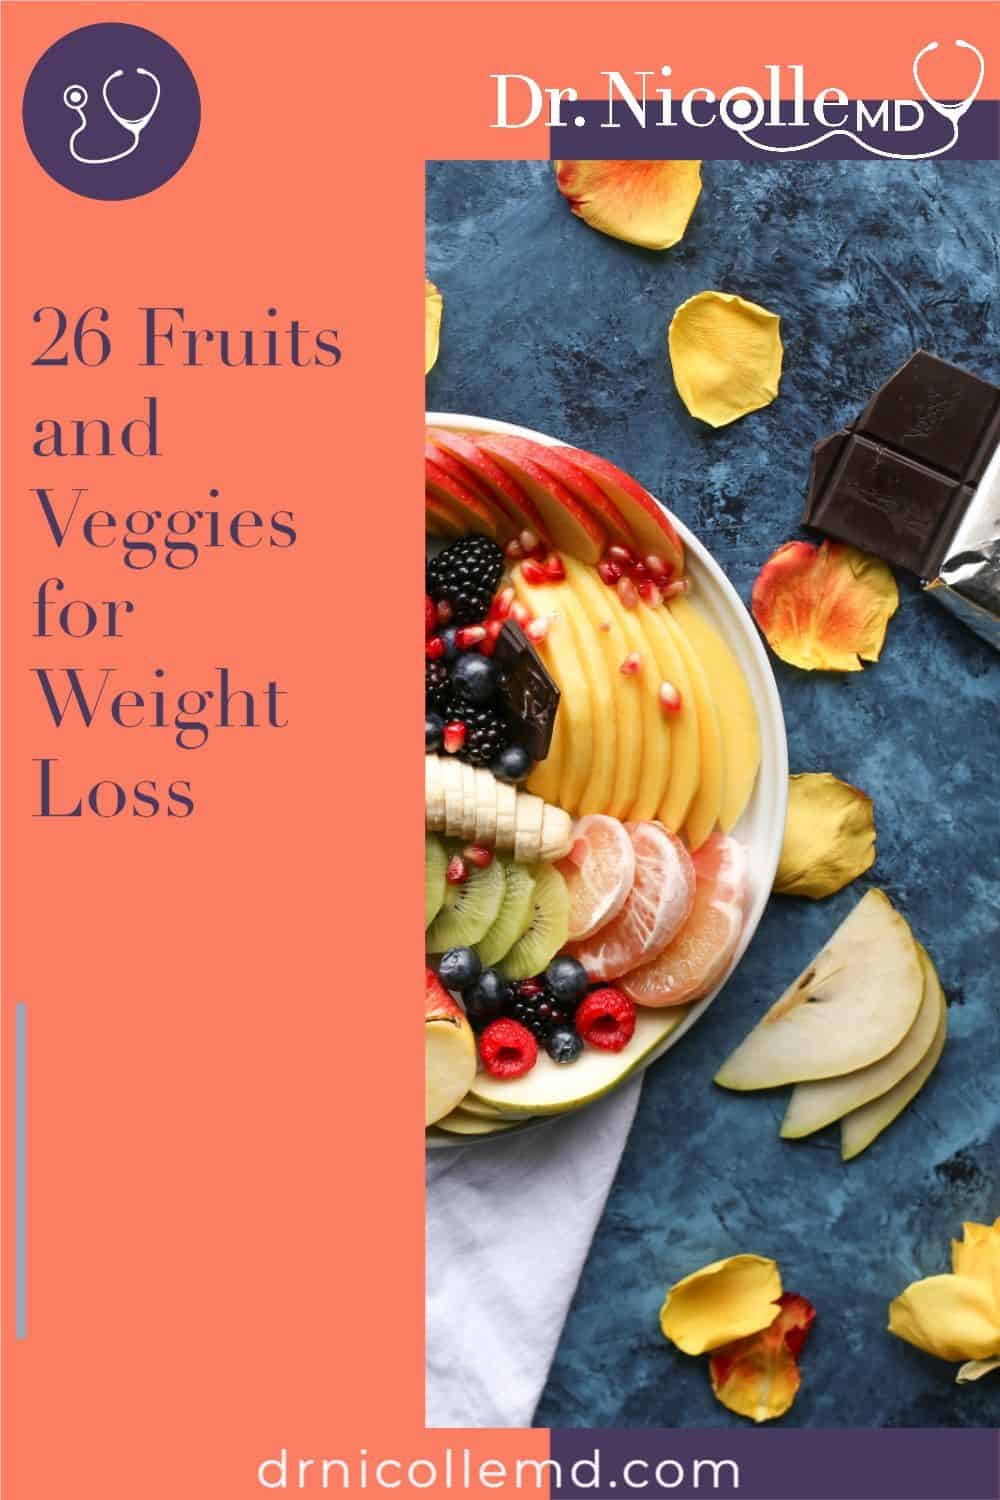 Best Fruits and Veggies for Weight Loss